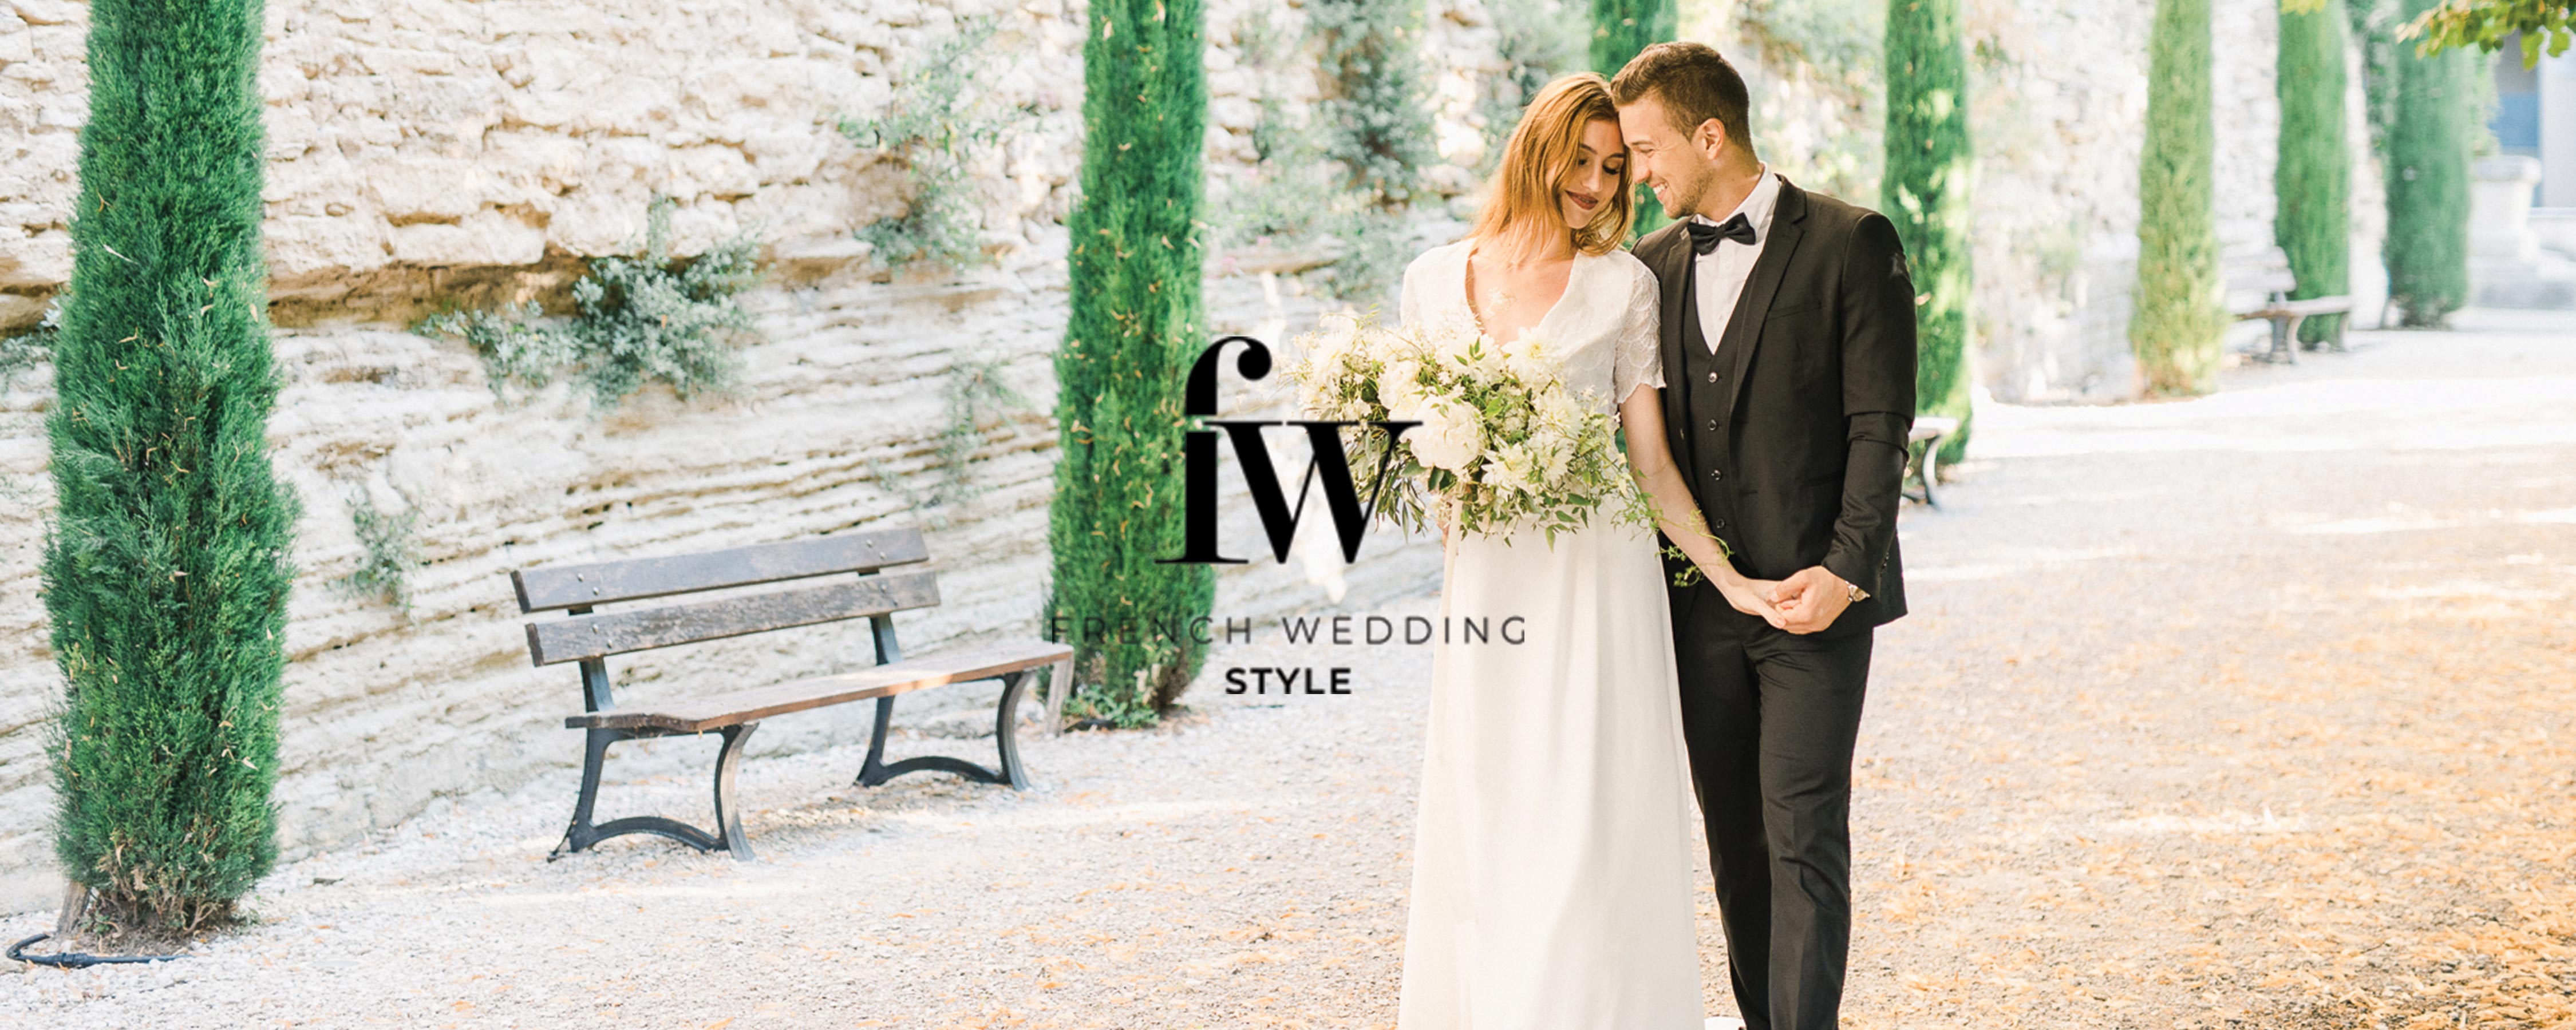 « French Wedding Style » speak about G&S, 20 Août 20